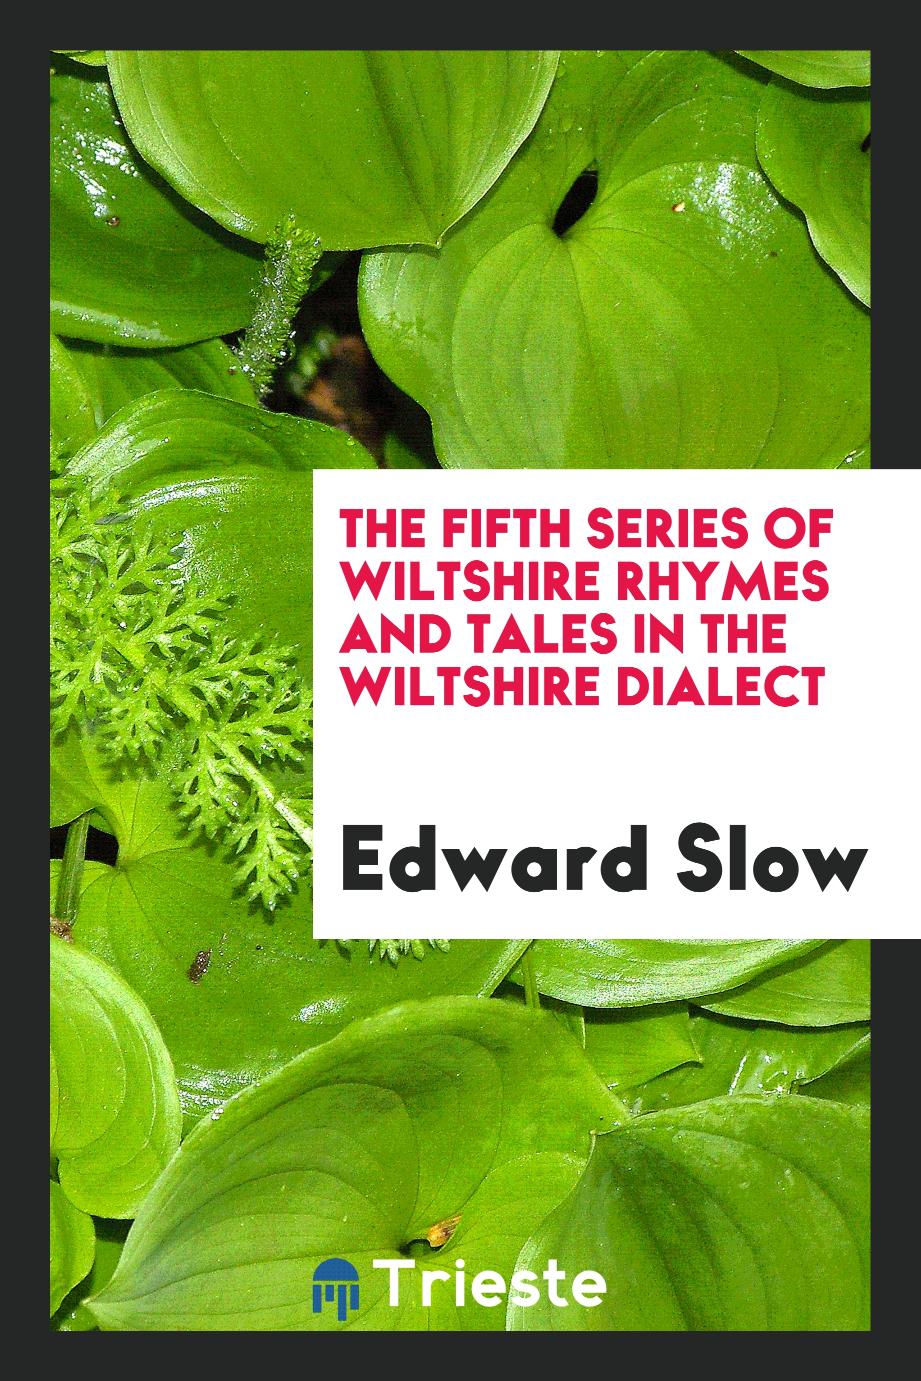 The fifth series of Wiltshire rhymes and tales in the Wiltshire dialect